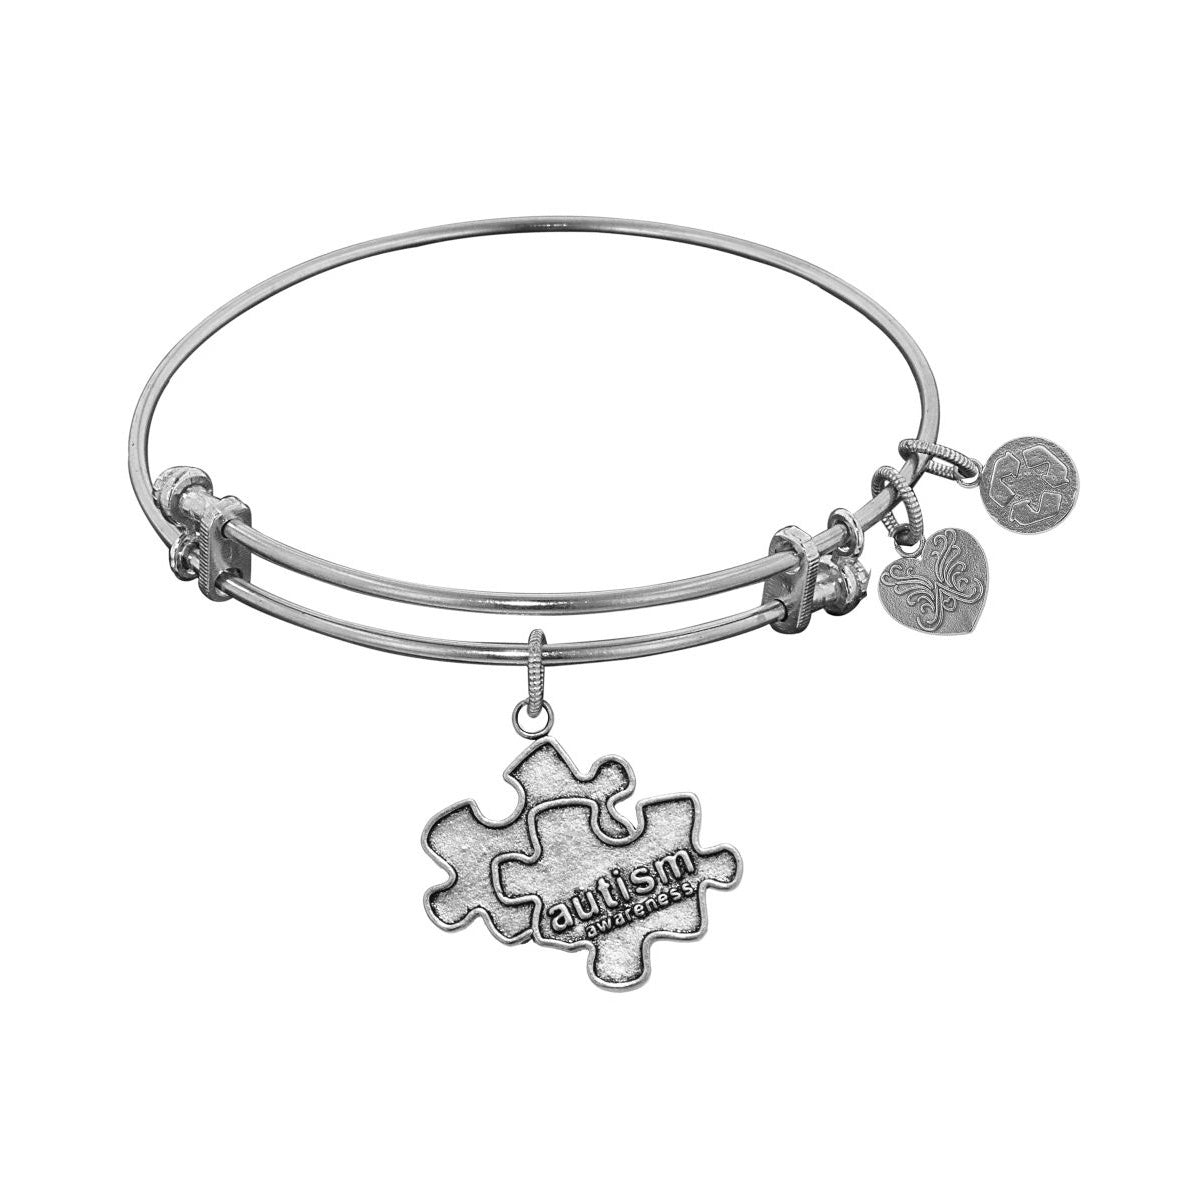 Smooth Finish Brass Generation Rescue Autism Angelica Bangle Bracelet, 7.25" fine designer jewelry for men and women